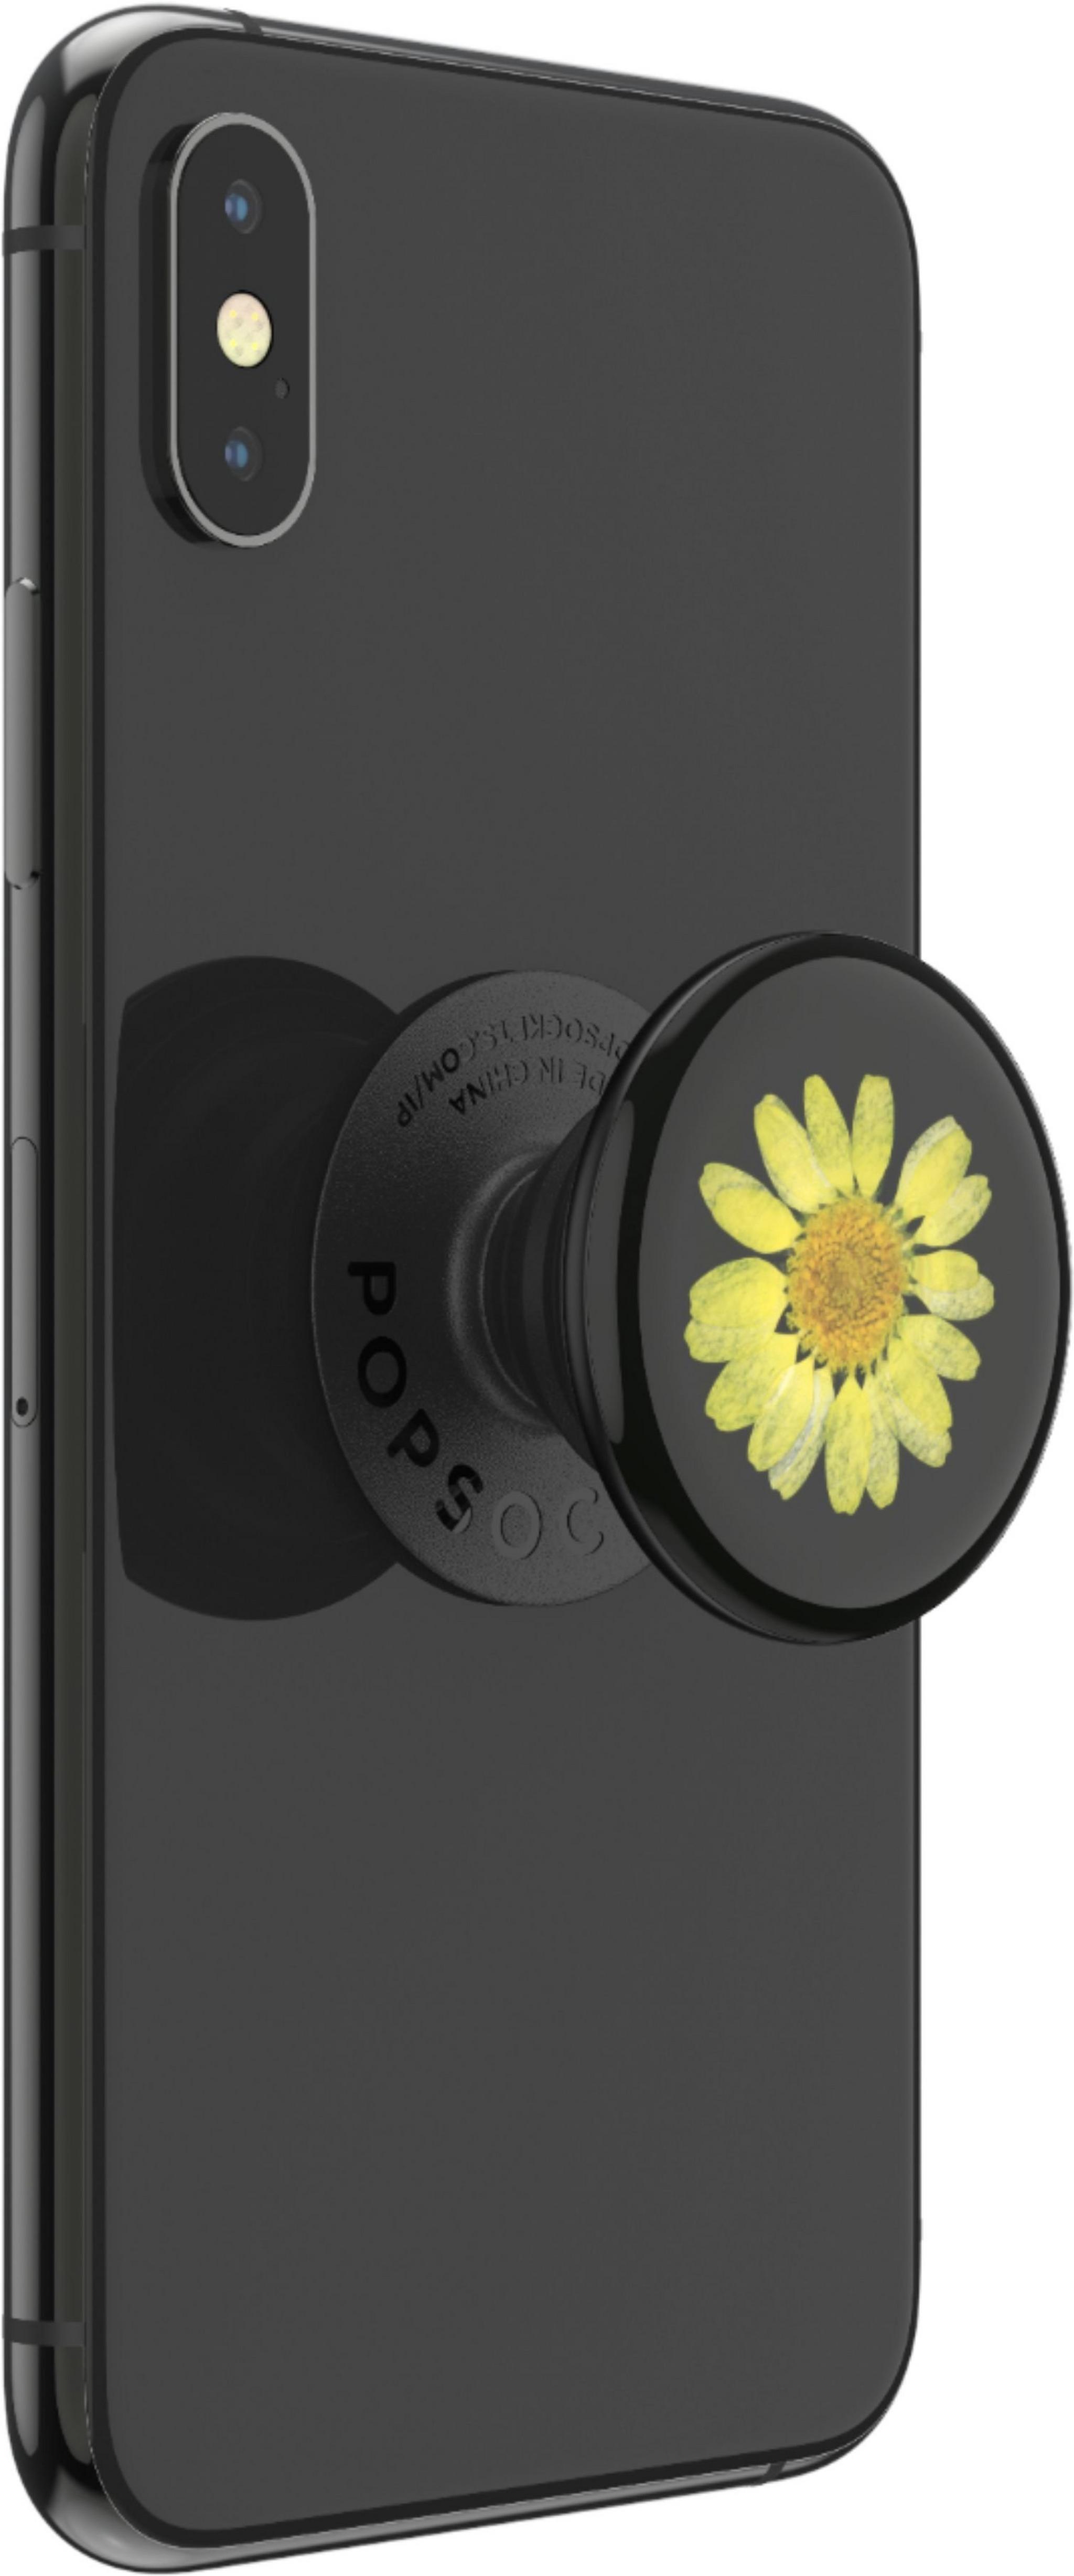 PopSockets Phone Stand and Grip (802999) – Pressed Flower Yellow Daisy